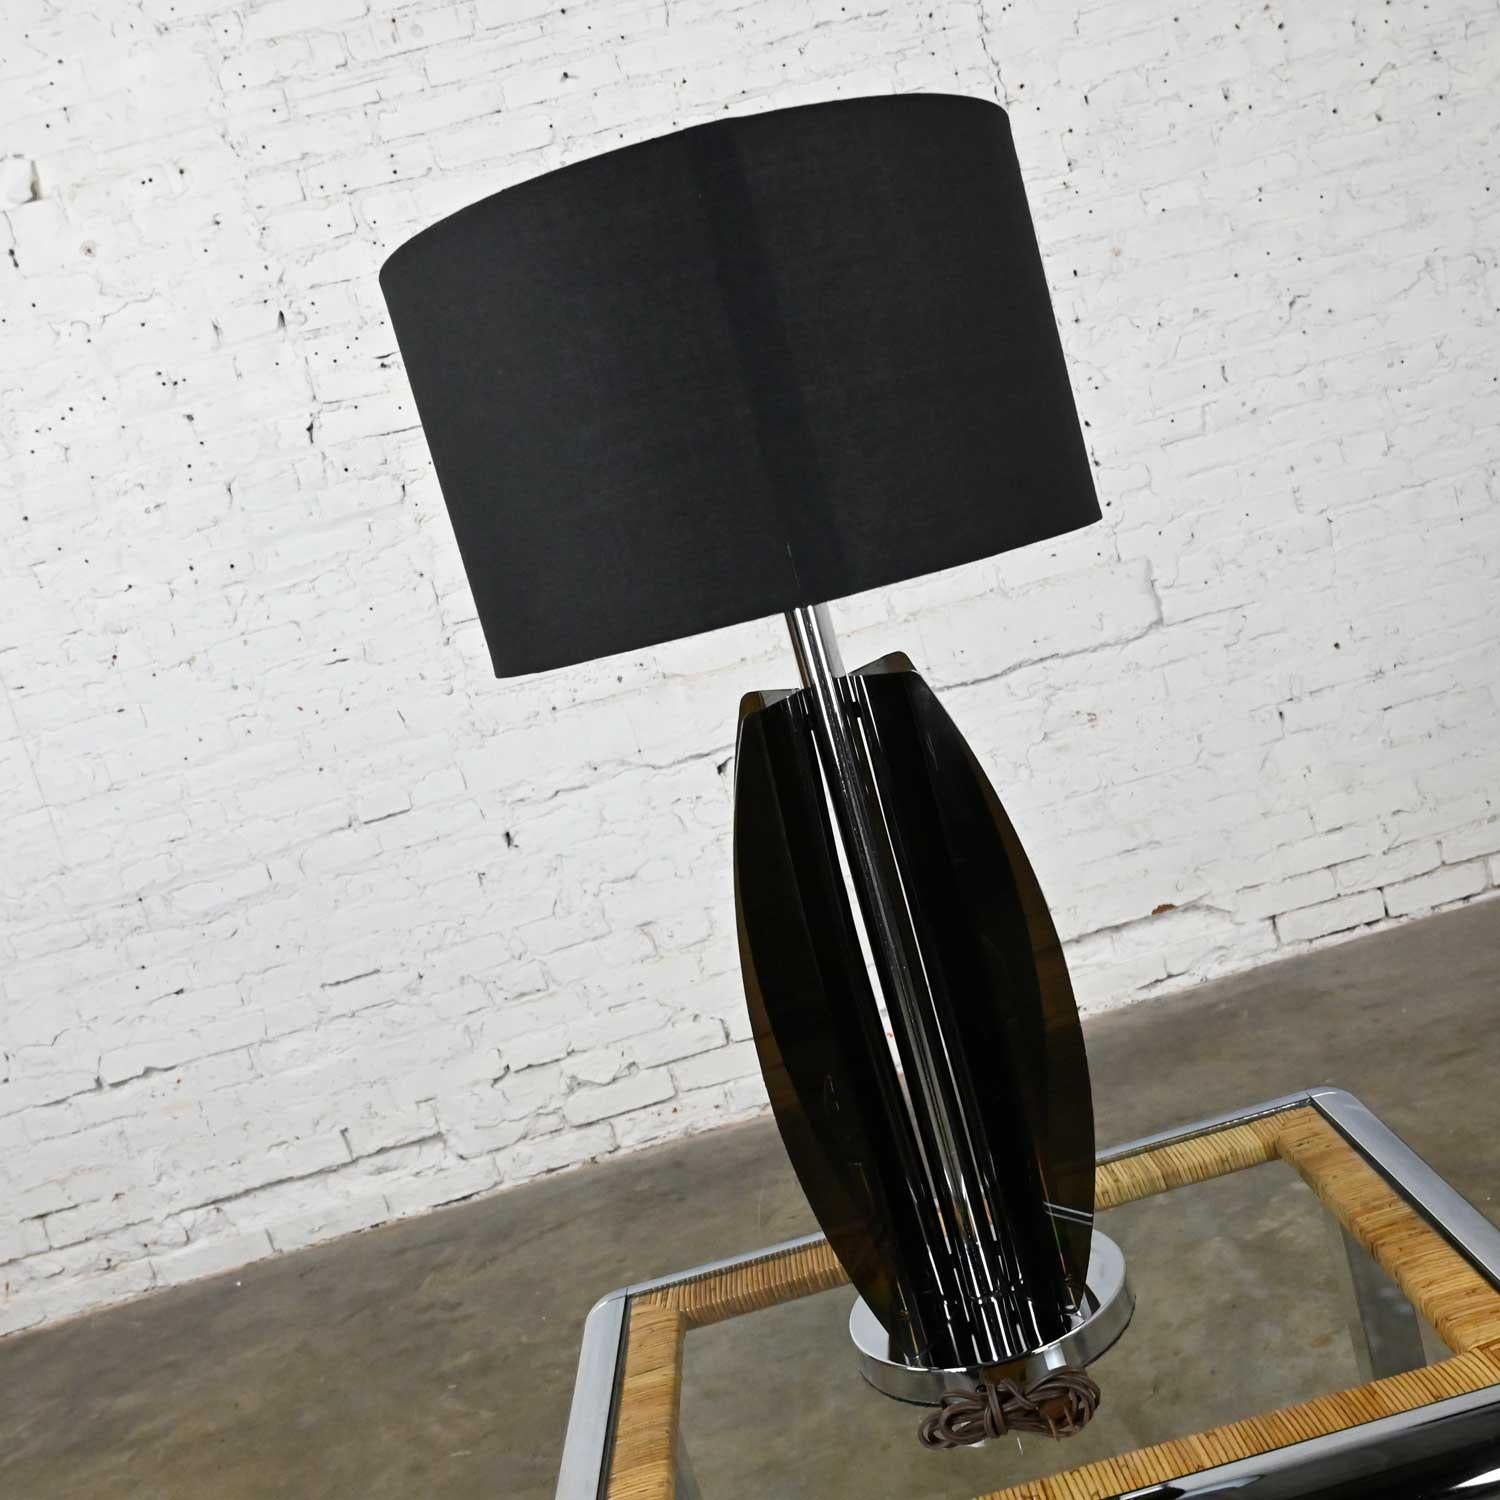 Absolutely awesome, circa 1960s, Mid-Century Modern smoke gray/grey Lucite and chrome table lamp with new black drum shade which as always you can let us know if you would like the lamp shipped with or without the shade. Beautiful condition, keeping